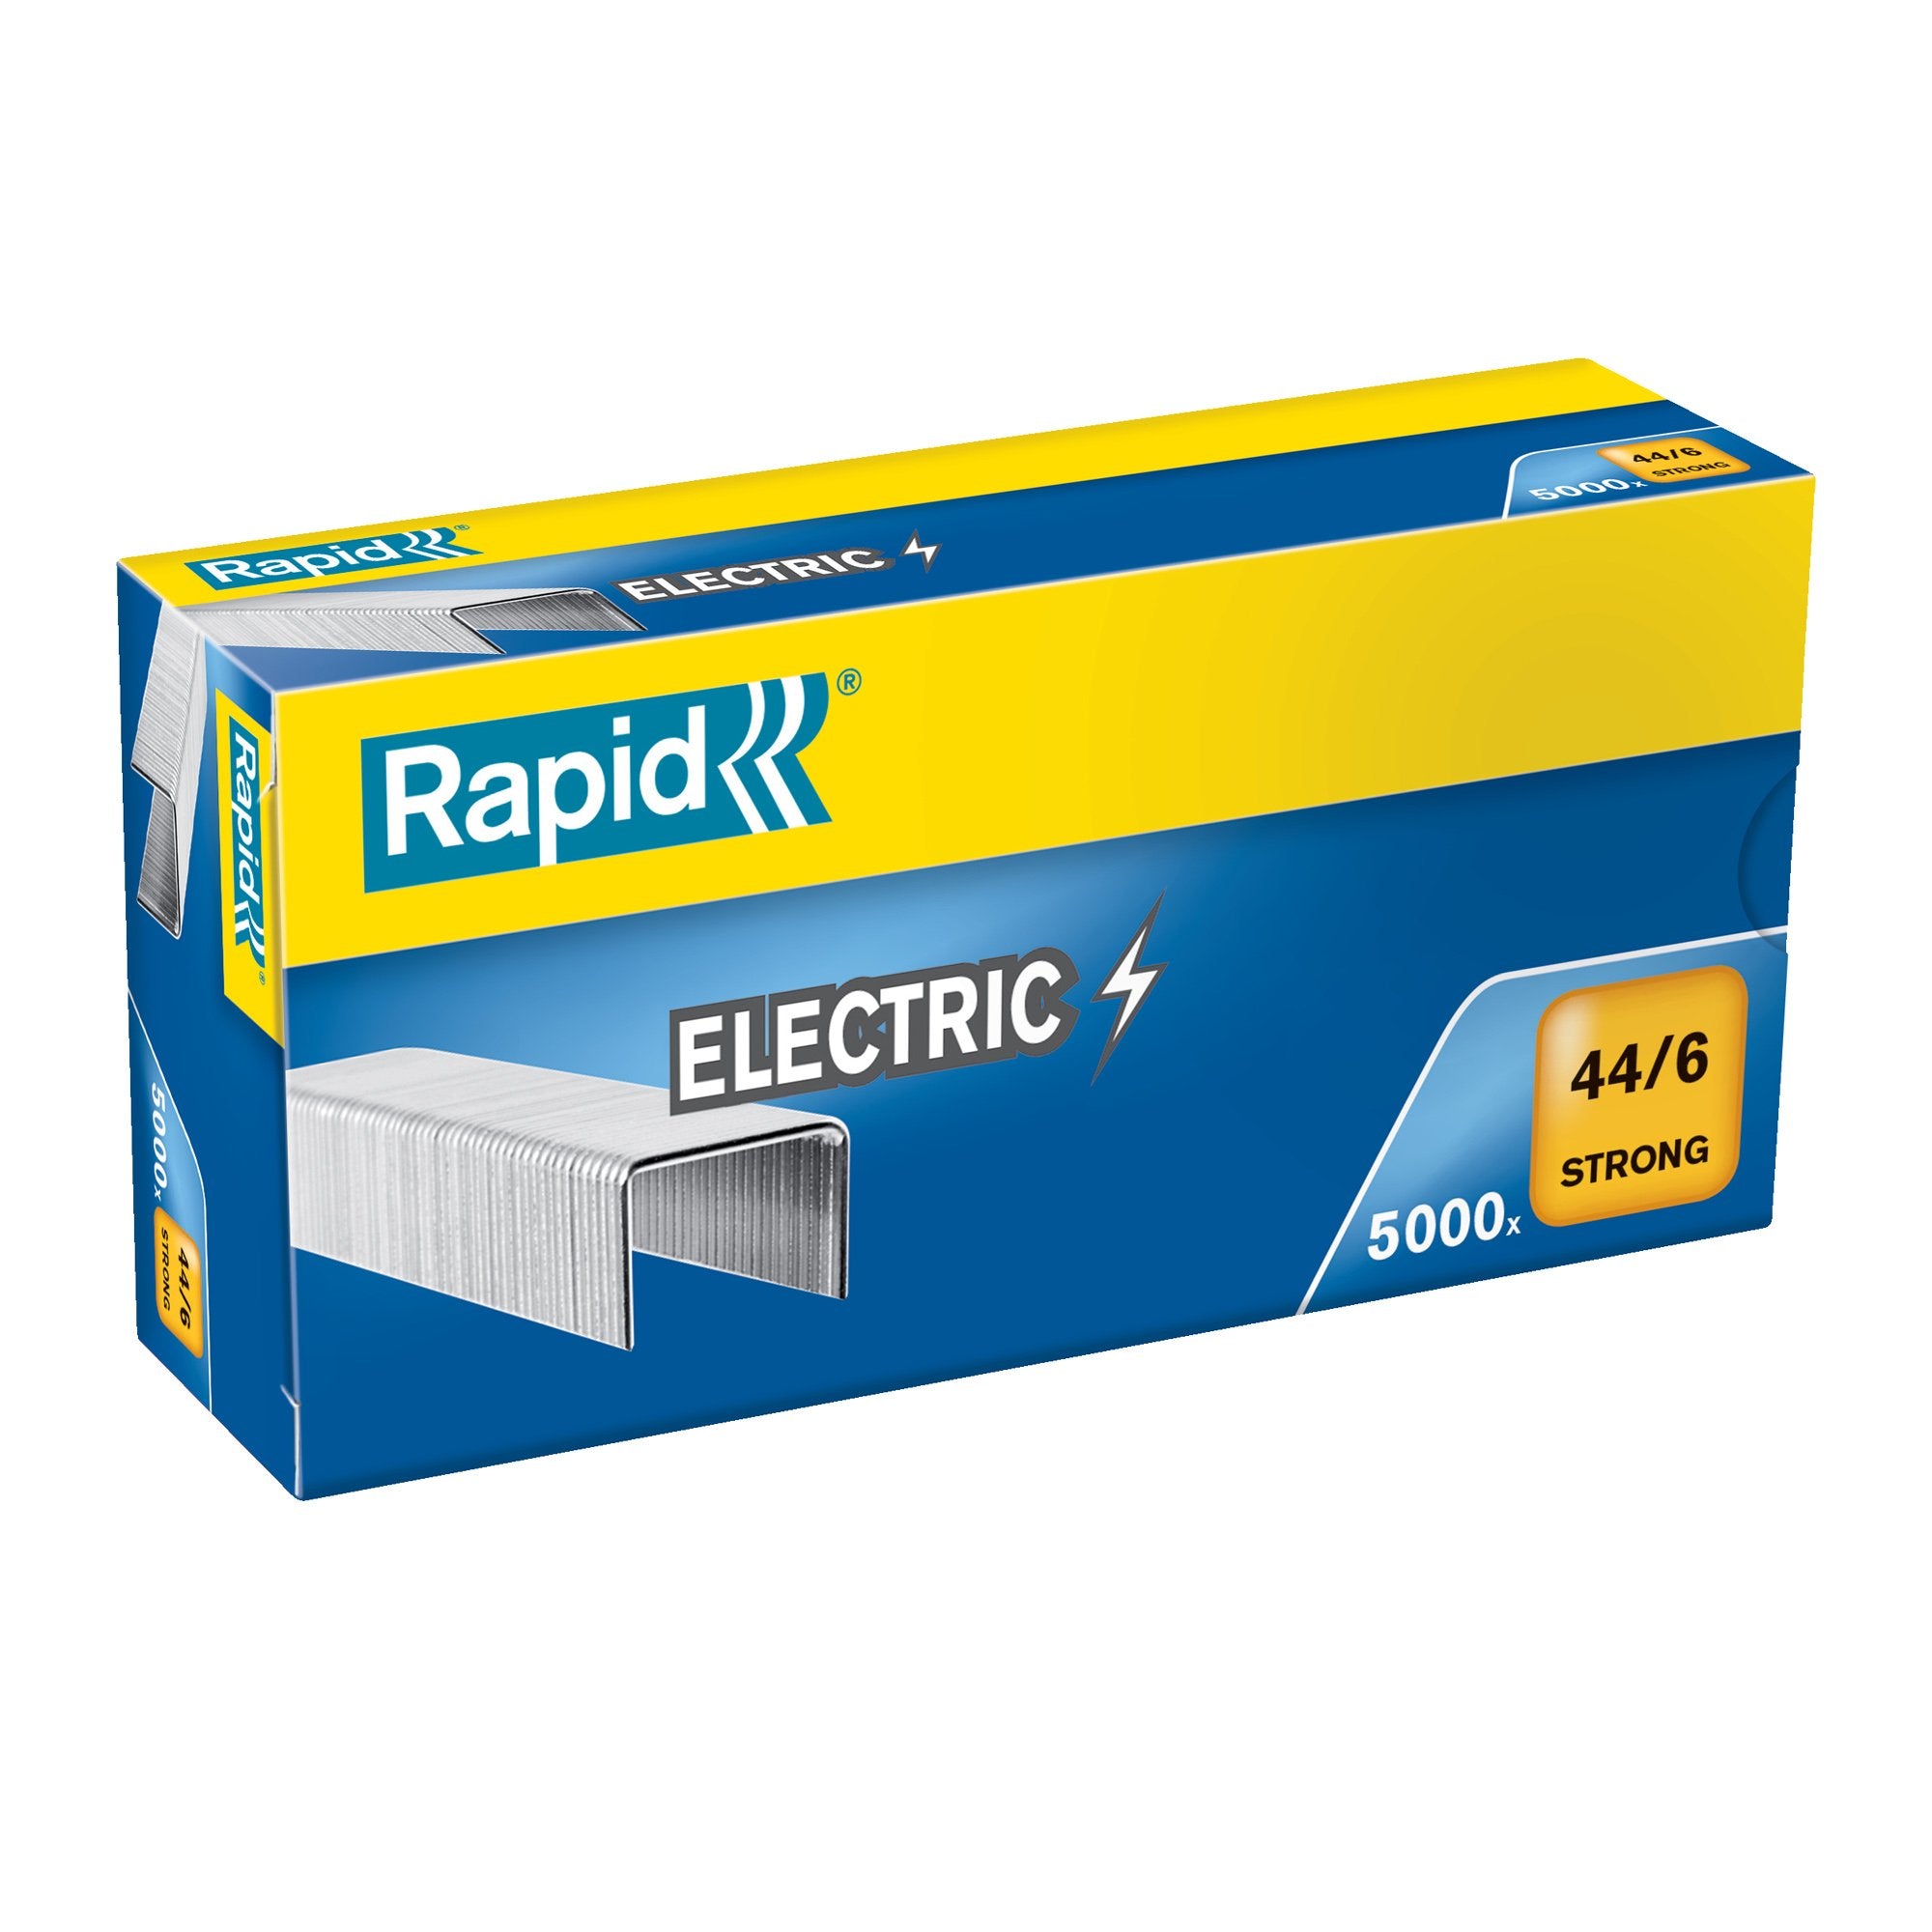 rapid-scatola-5000-punti-special-electric-44-6